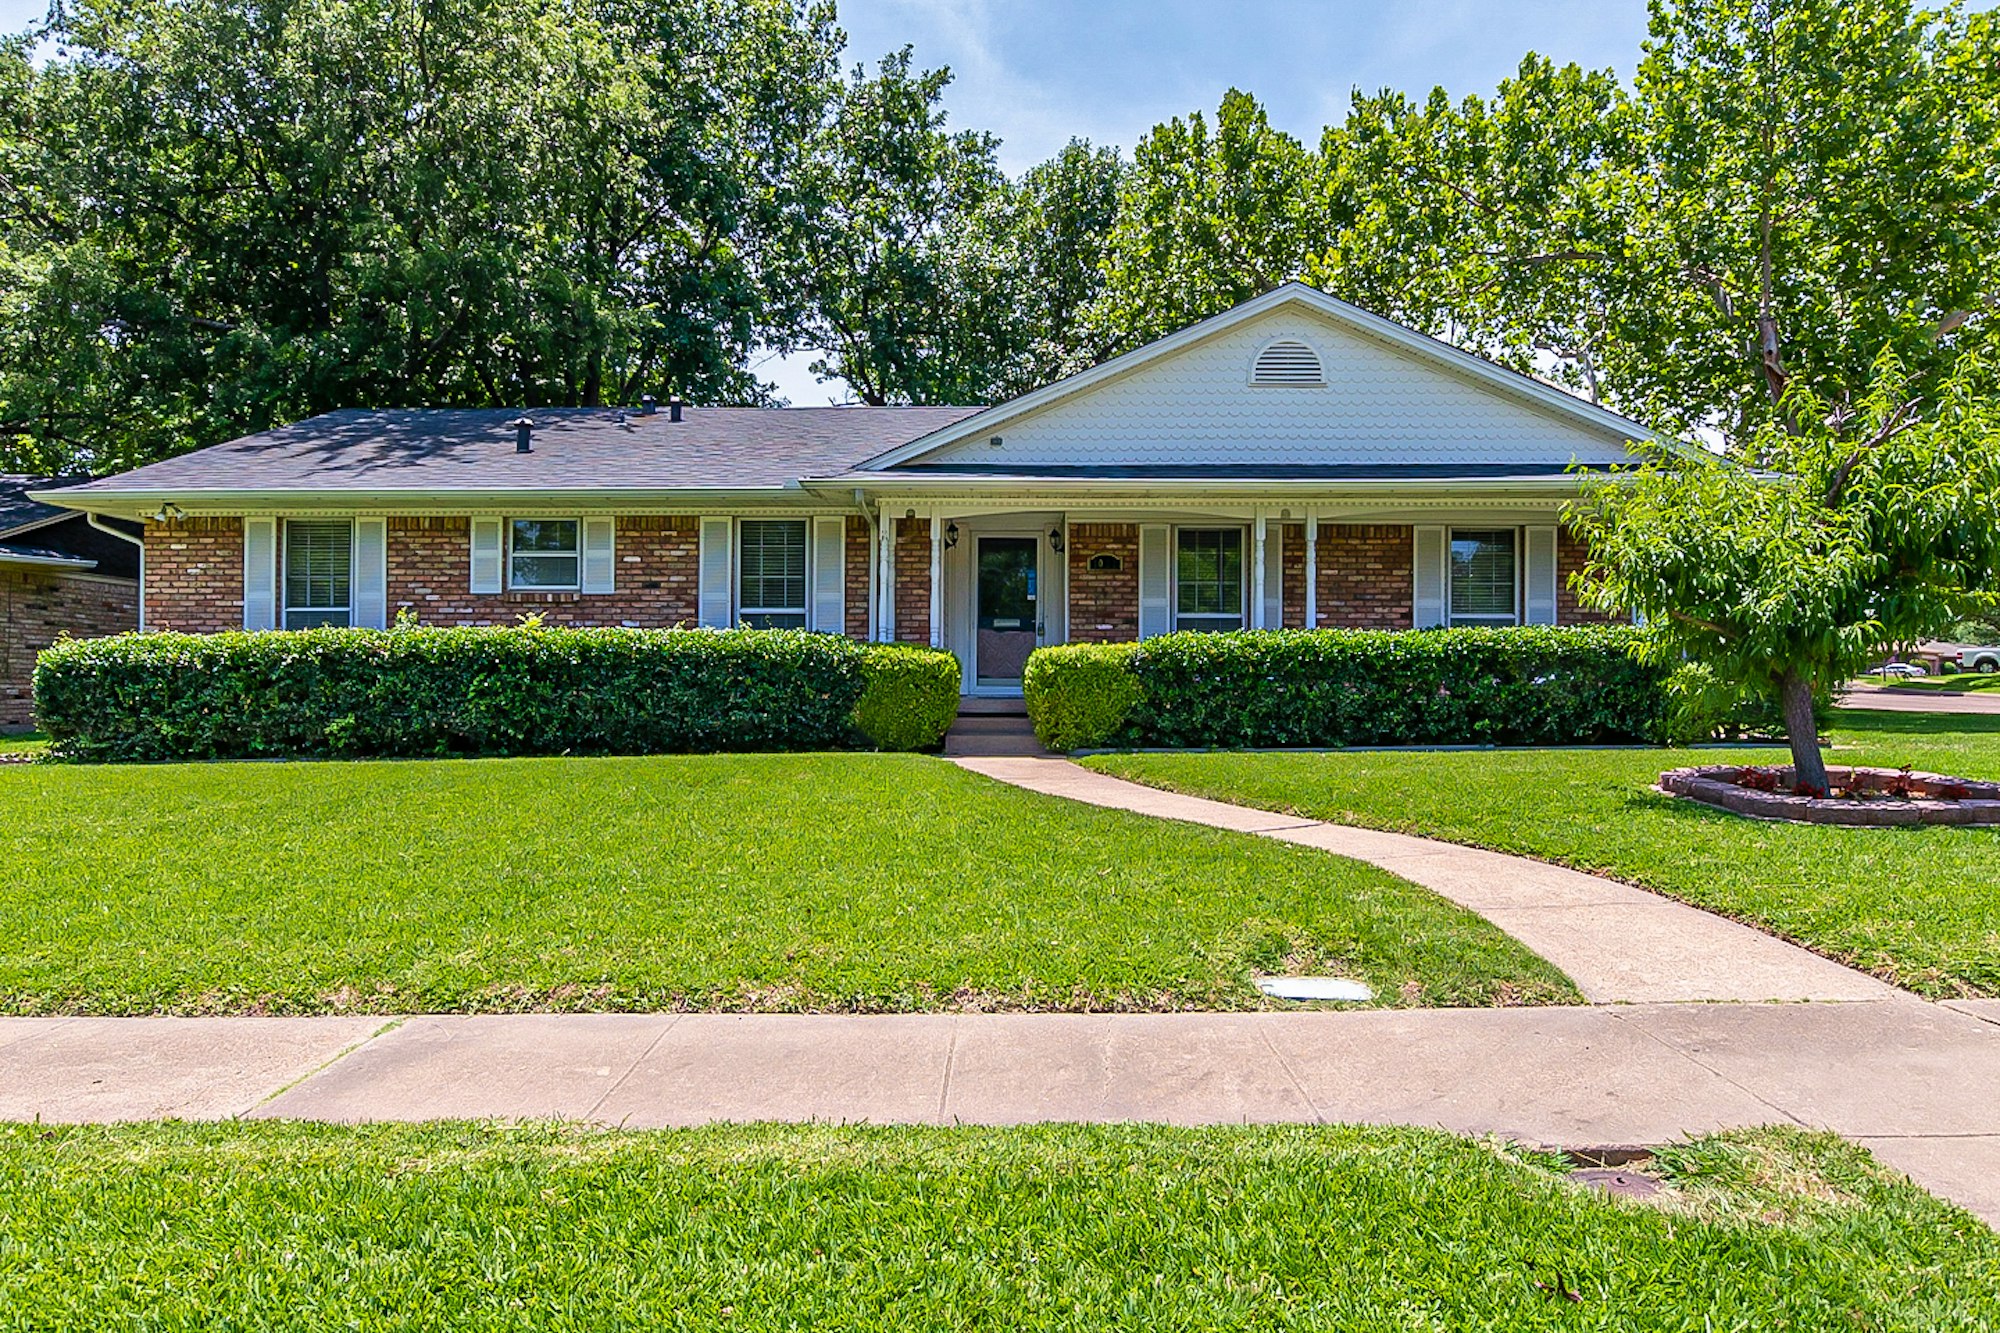 Photo 1 of 30 - 1022 Bardfield Ave, Garland, TX 75041